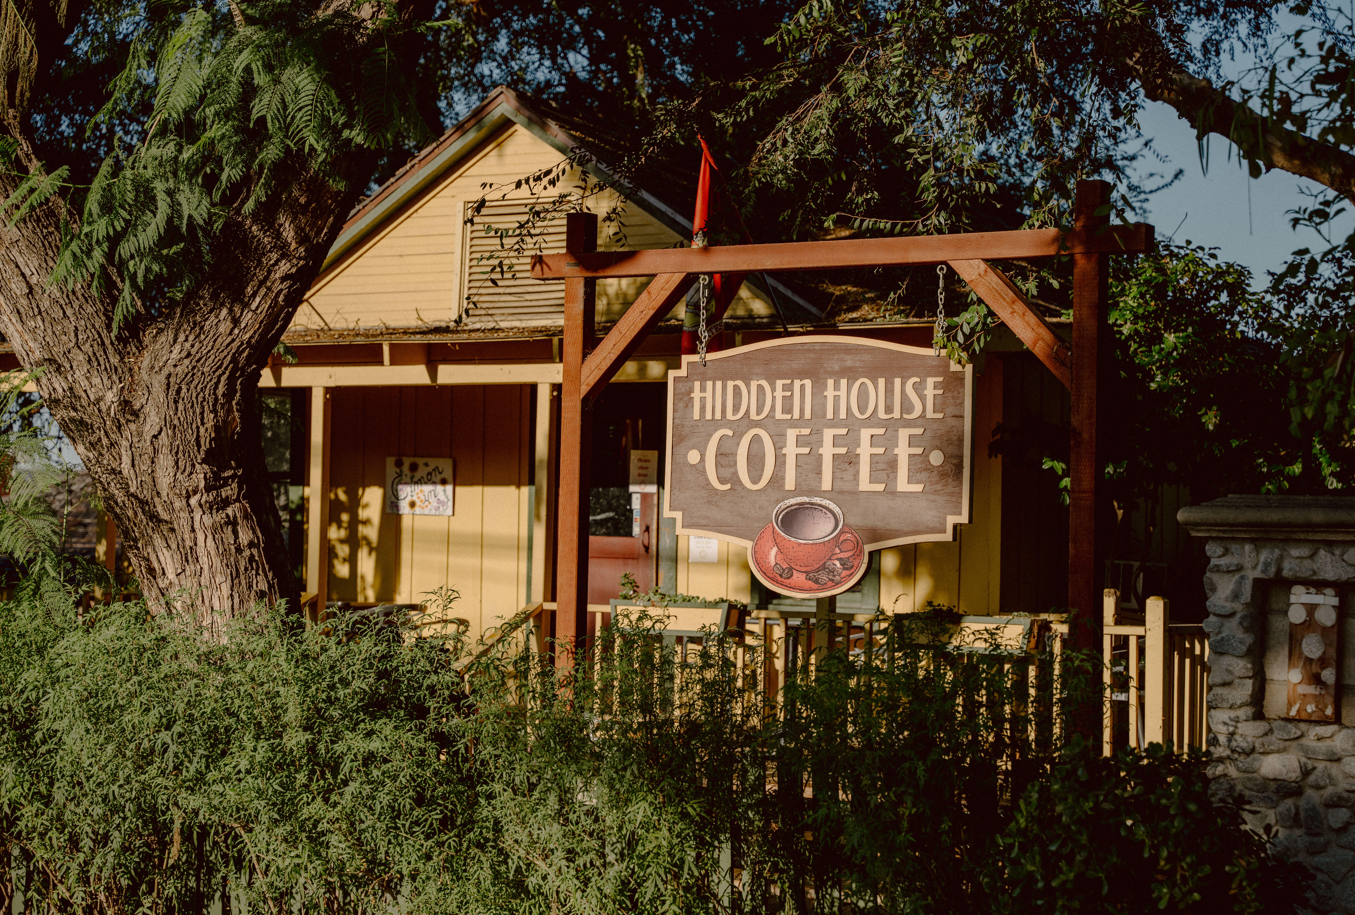 Image of Hidden House Coffee, surrounded by trees in San Juan Capistrano.